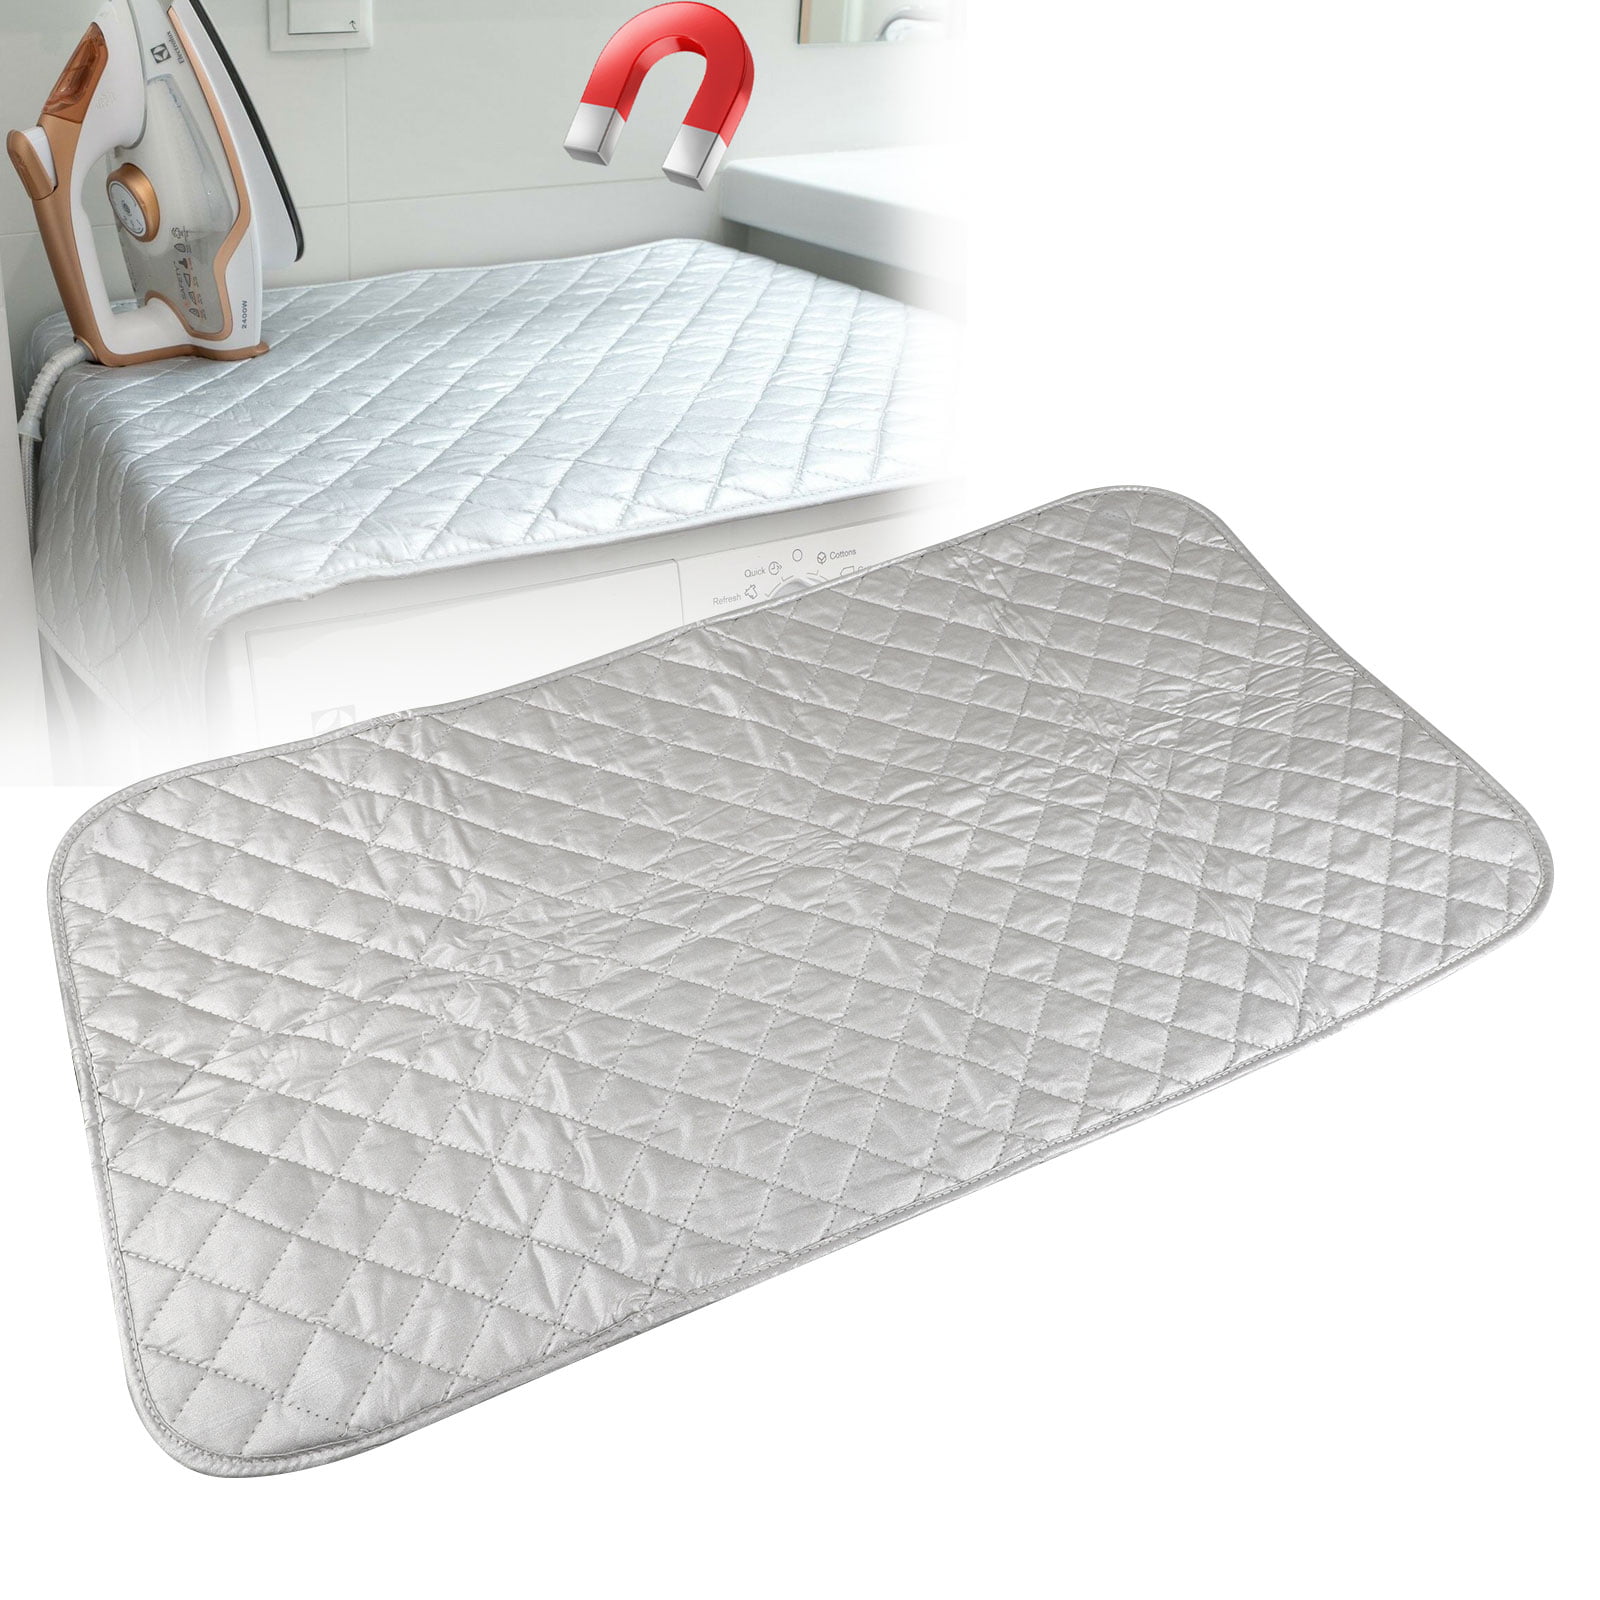 Heat Reflective Encasa Homes Ironing Mat / Pad Quilting with 5mm Foam Padding & Silicone Iron Rest for Steam Pressing on Tabletop or Bed Portable Large 27 x 20 inch Metallic Silver